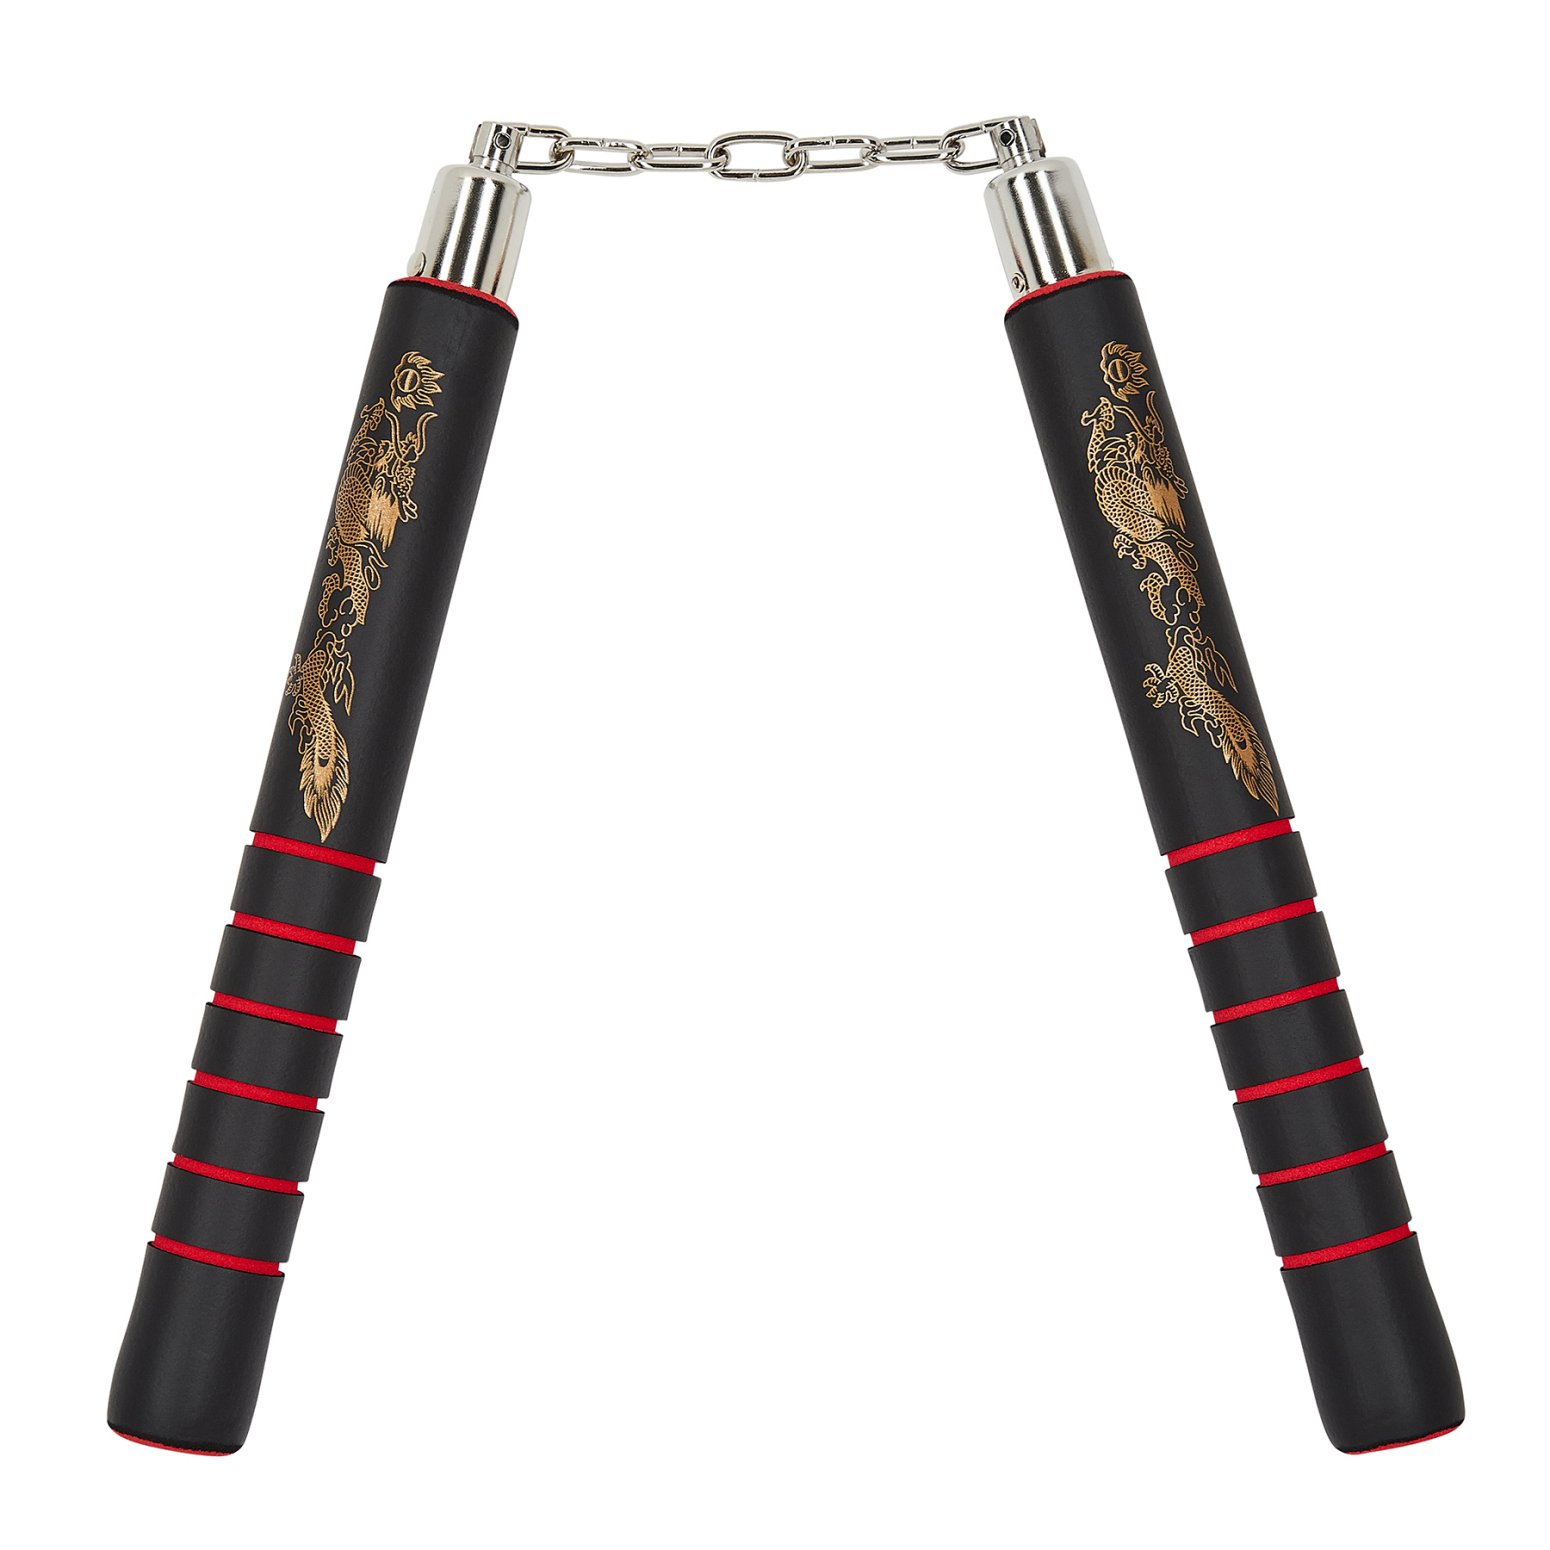 NR-027:Deluxe Foam Nunchaku B.B With Grip : Red grips - Click Image to Close